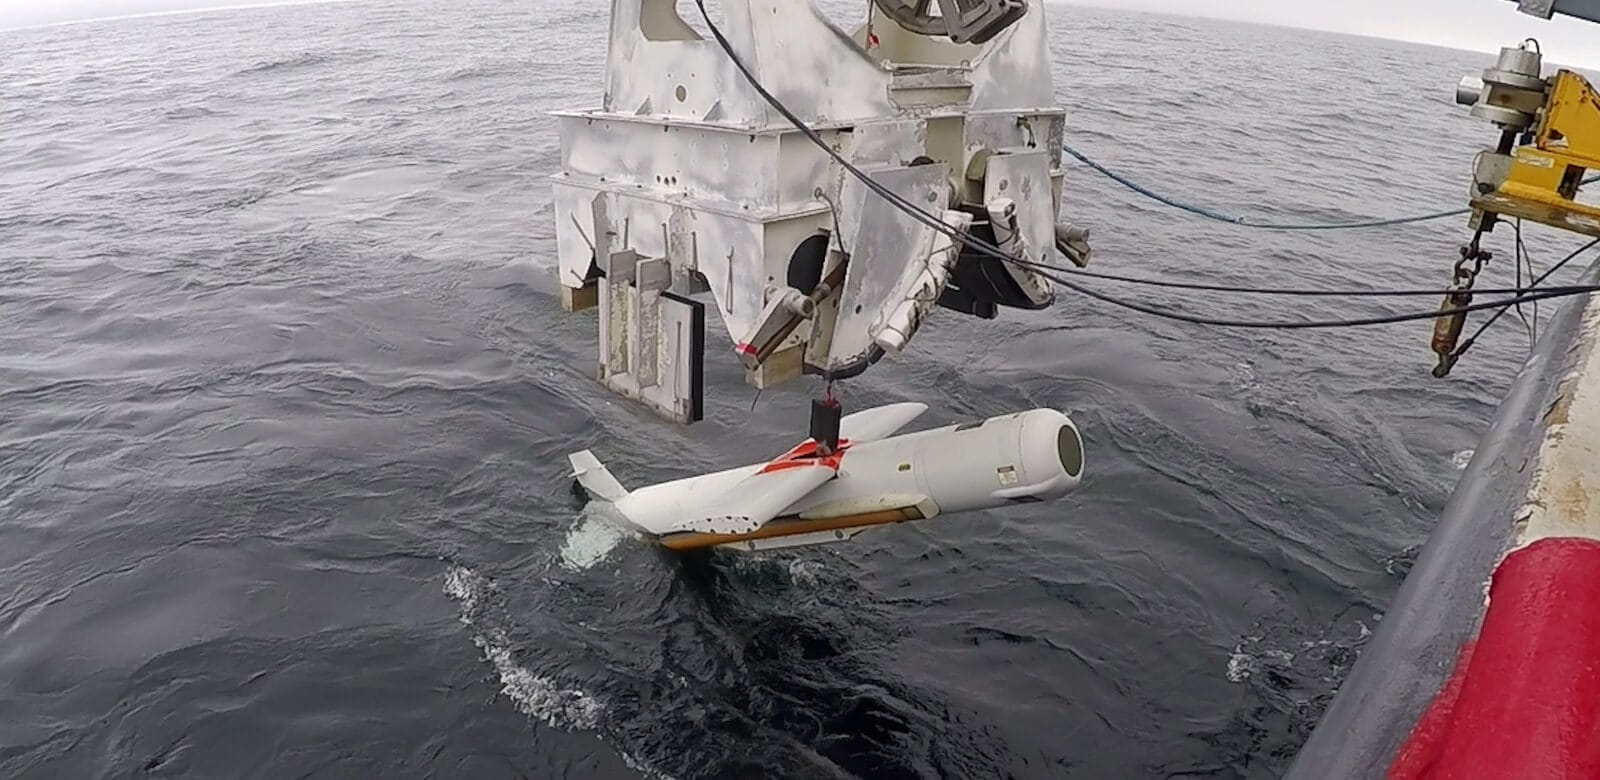 The AN/AQS-20 Minehunting Sonar enters the water. (Photo: US Navy)